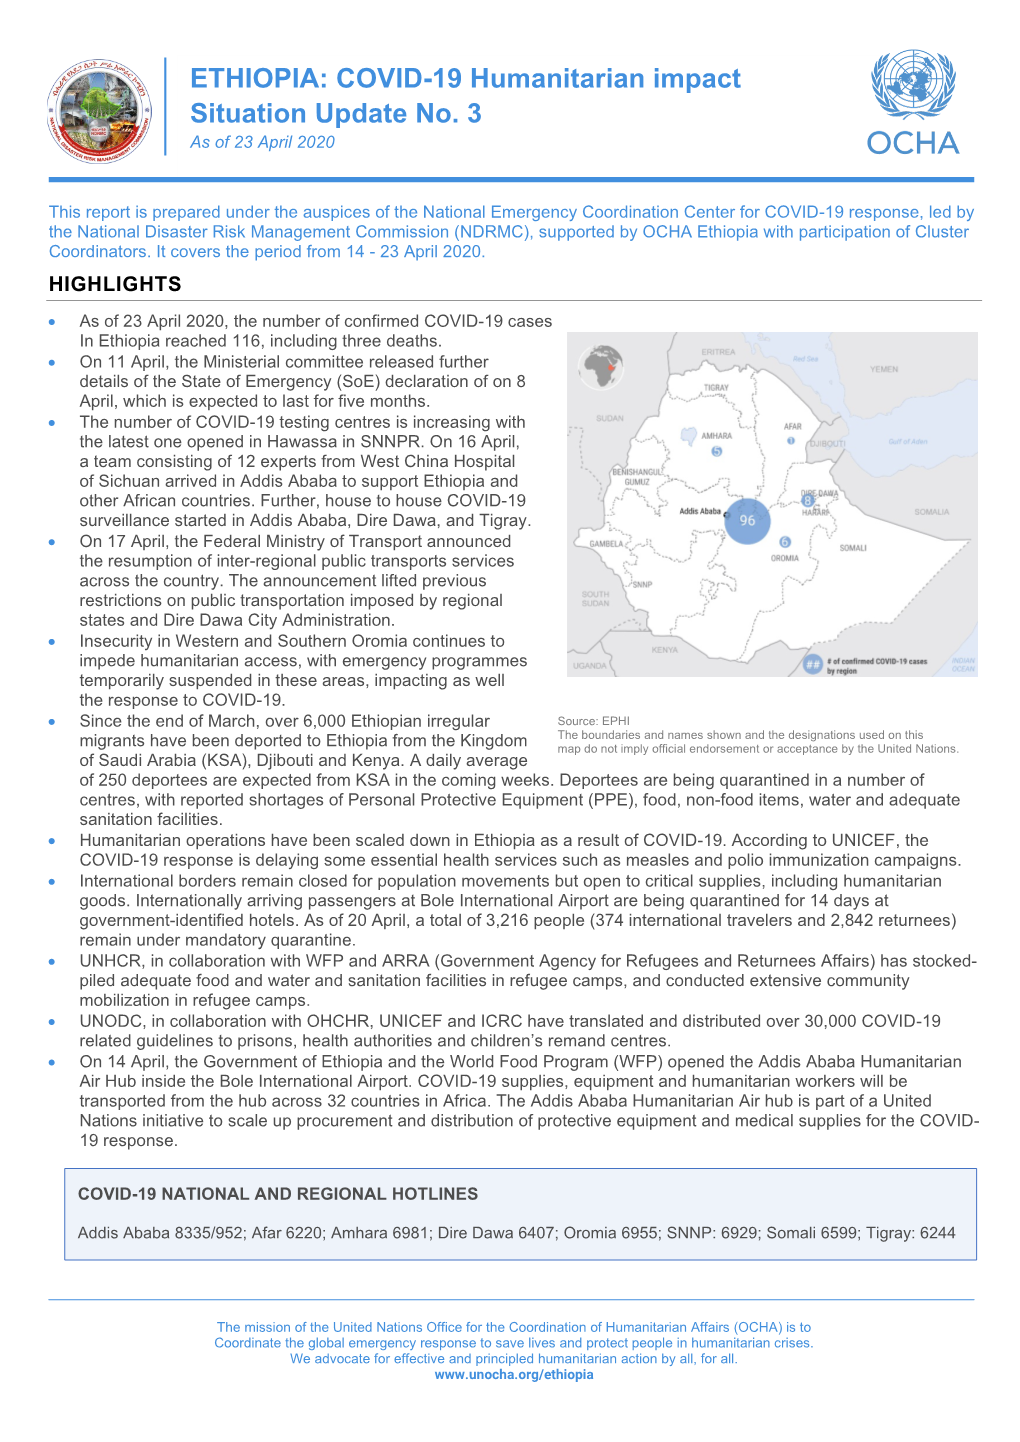 ETHIOPIA: COVID-19 Humanitarian Impact Situation Update No. 3 As of 23 April 2020